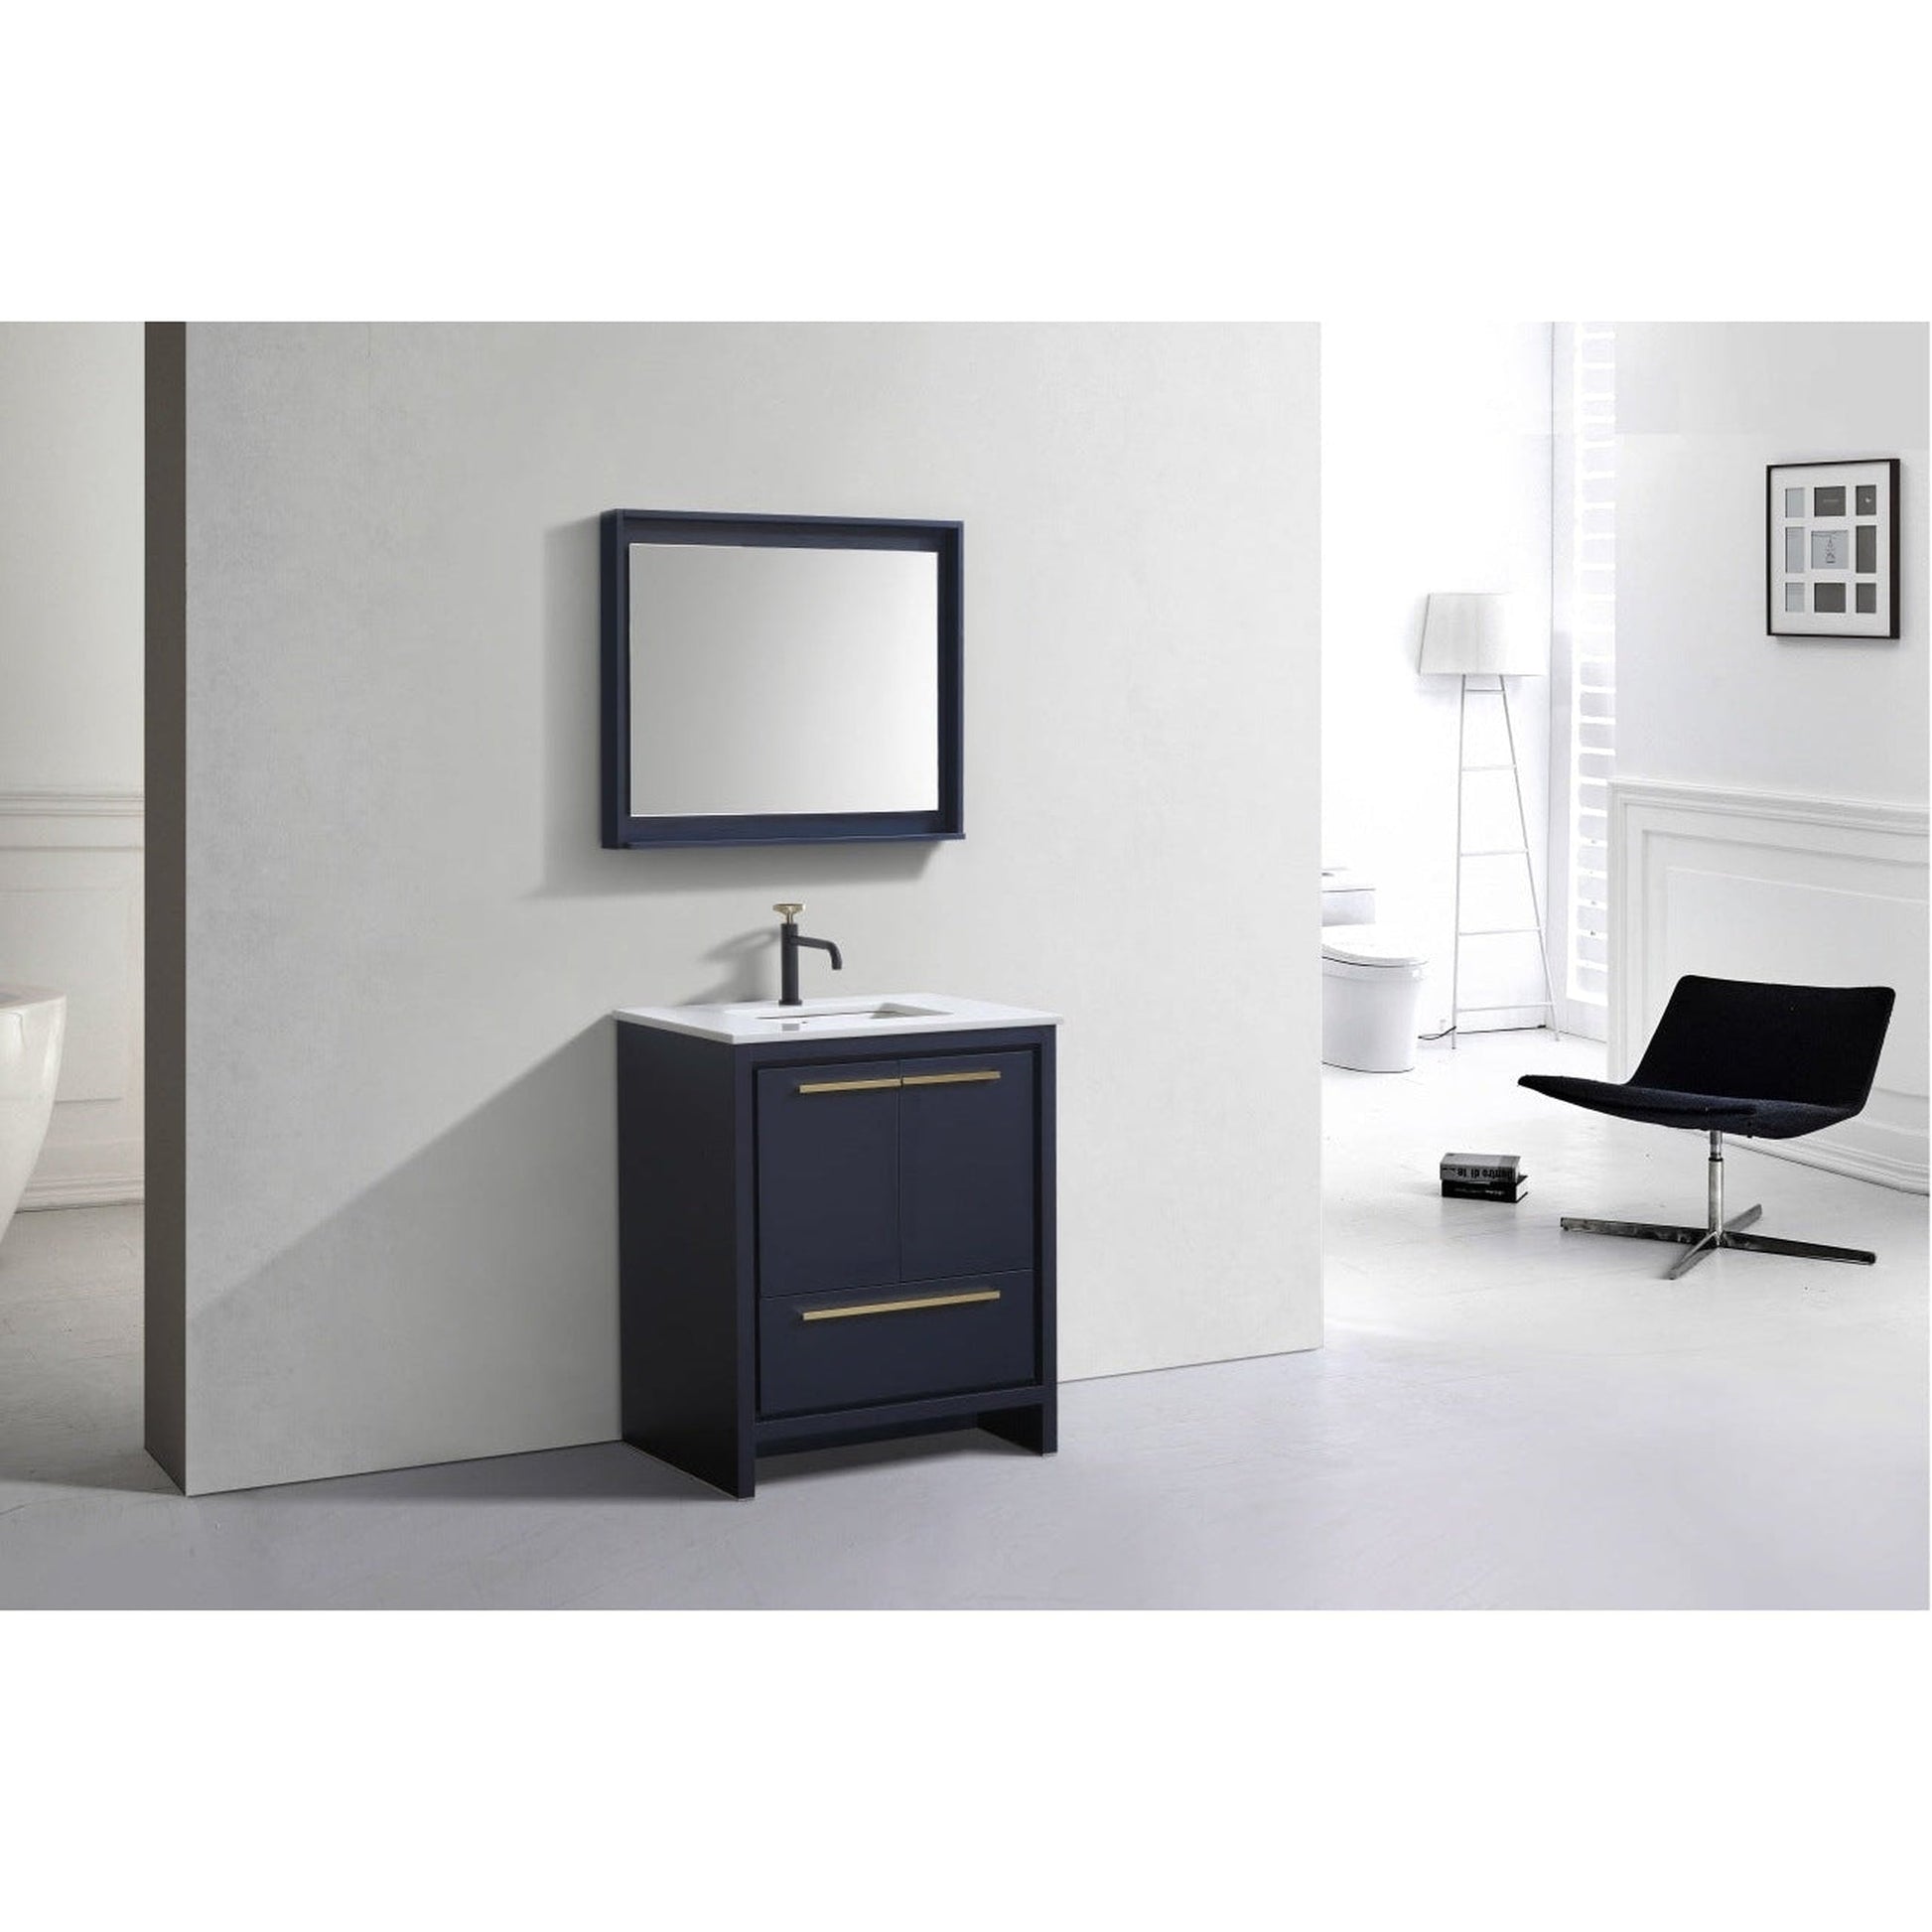 KubeBath Dolce 30" Blue Freestanding Modern Bathroom Vanity With Quartz Vanity Top & Ceramic Sink With Overflow and 30" White Framed Mirror With Shelf